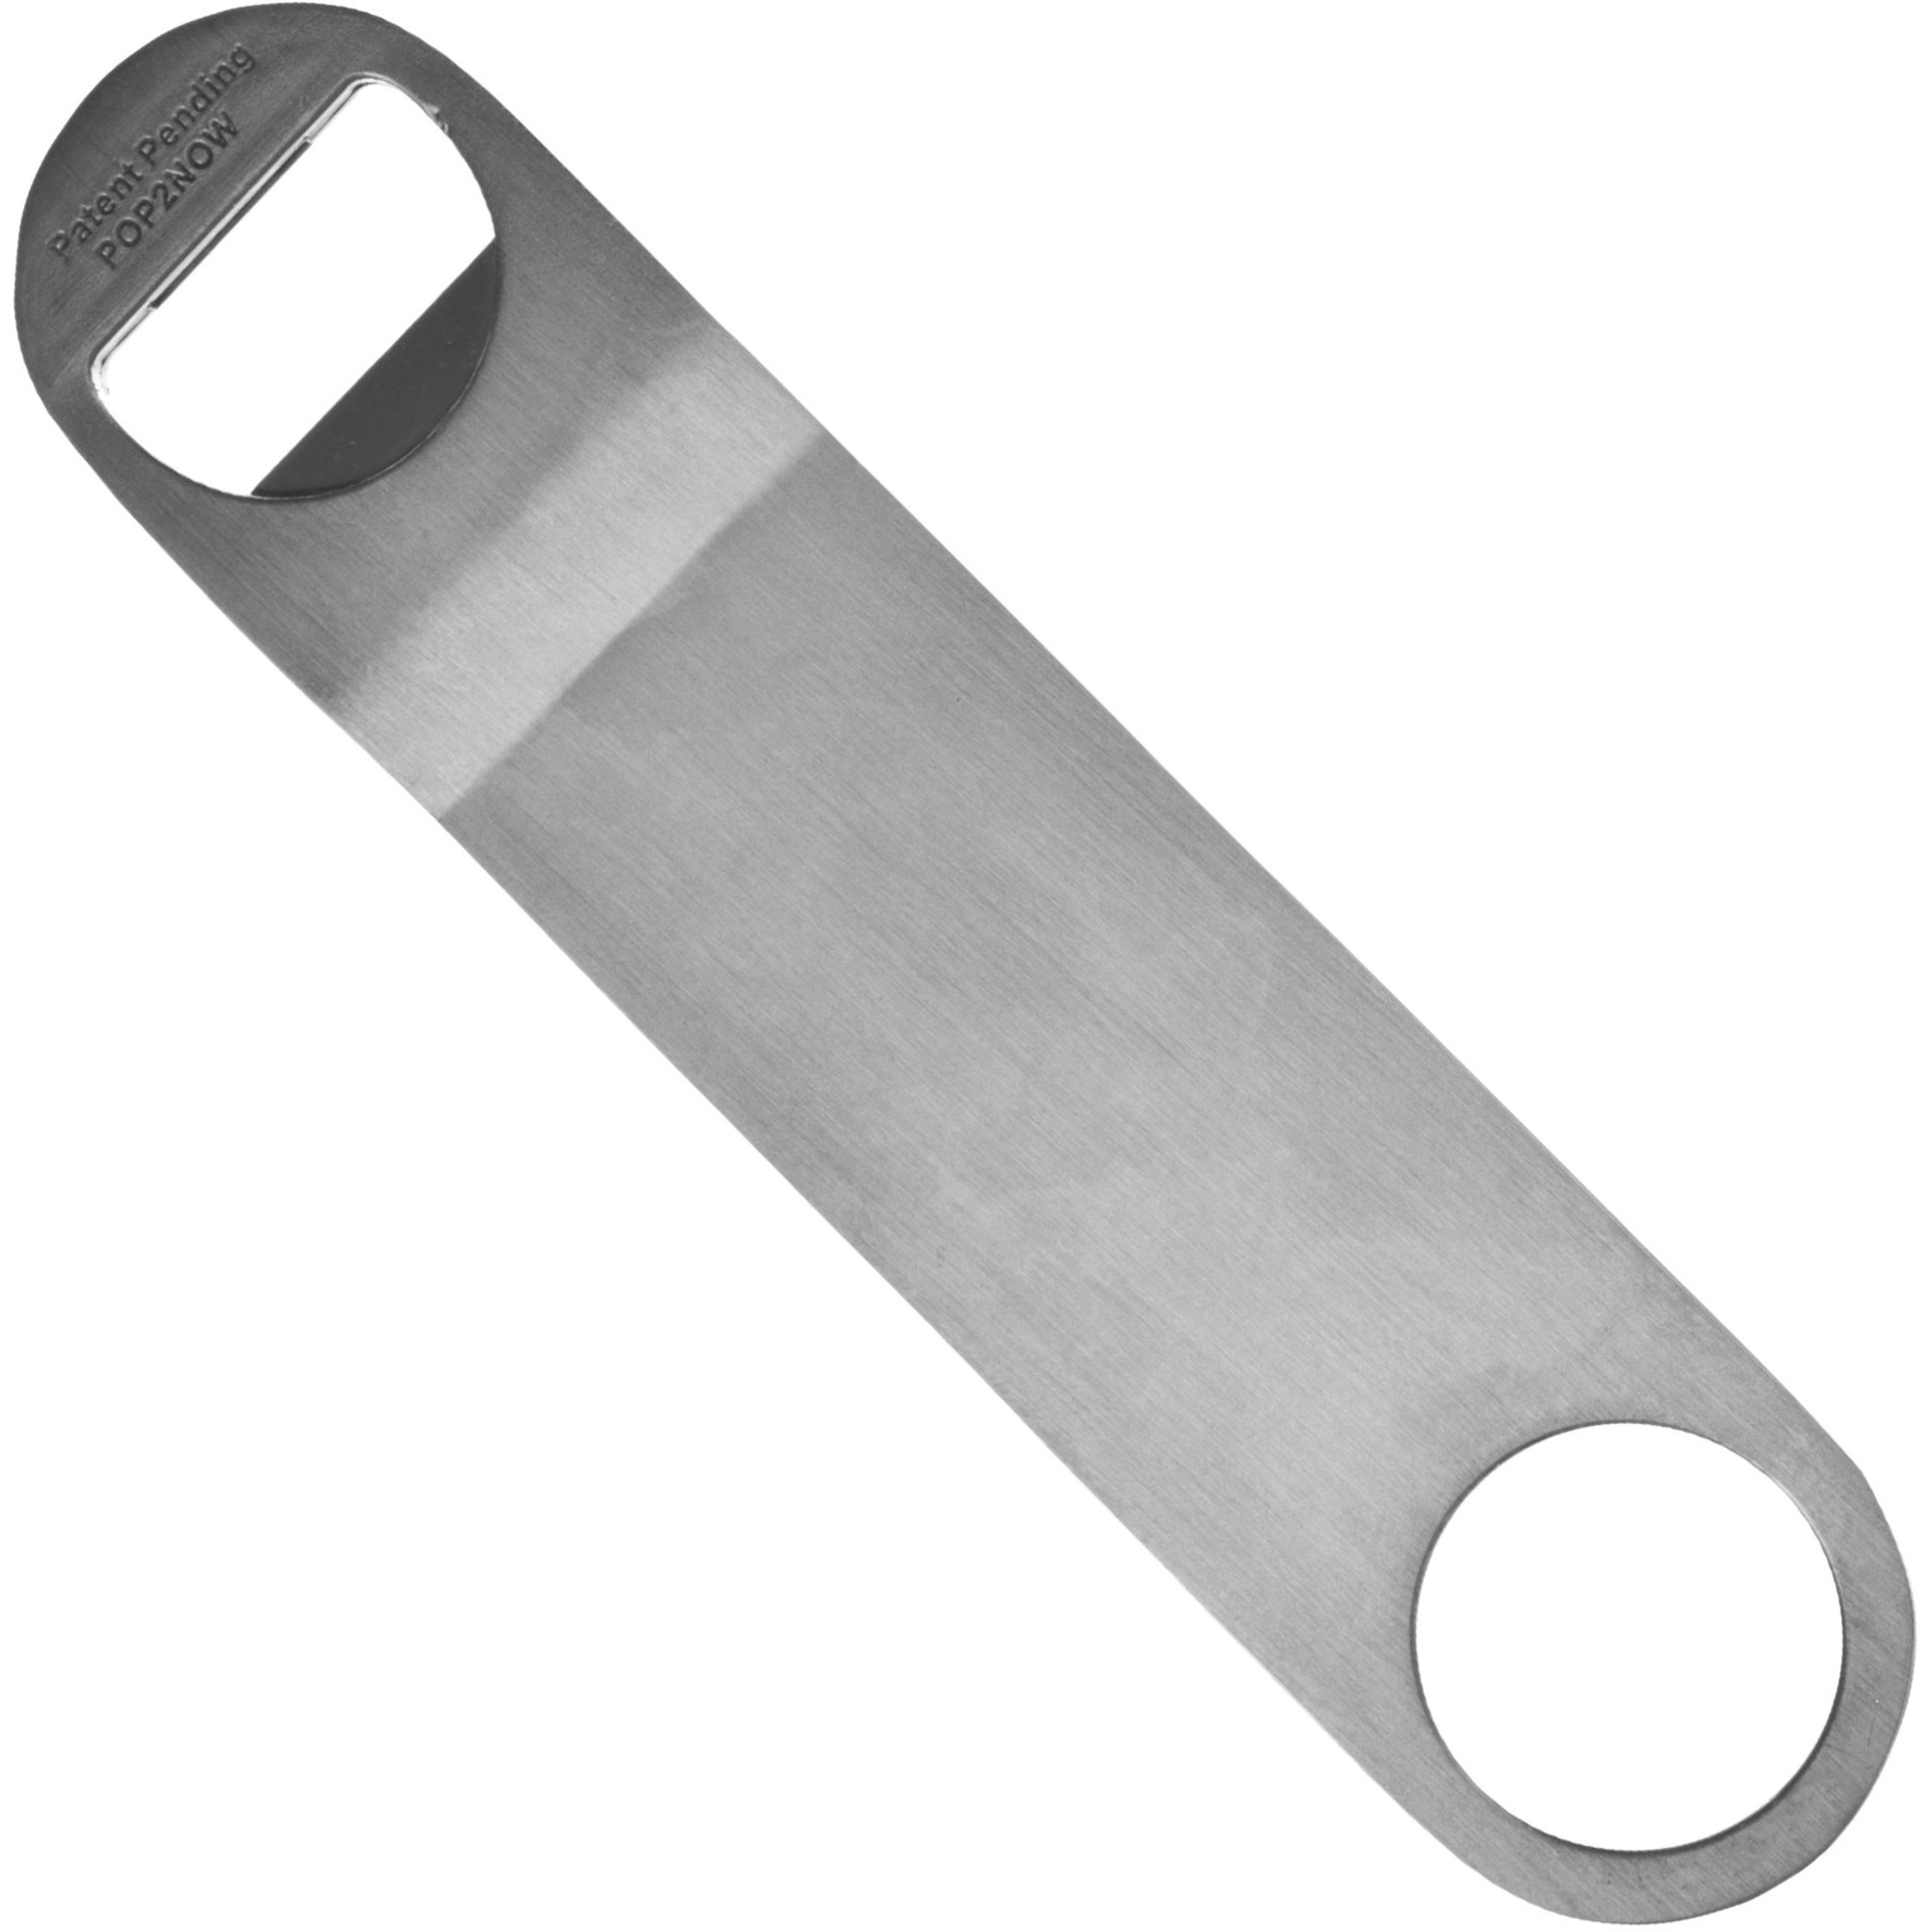 POP 2 NOW Dual Function Bottle Can Opener - image 1 of 2